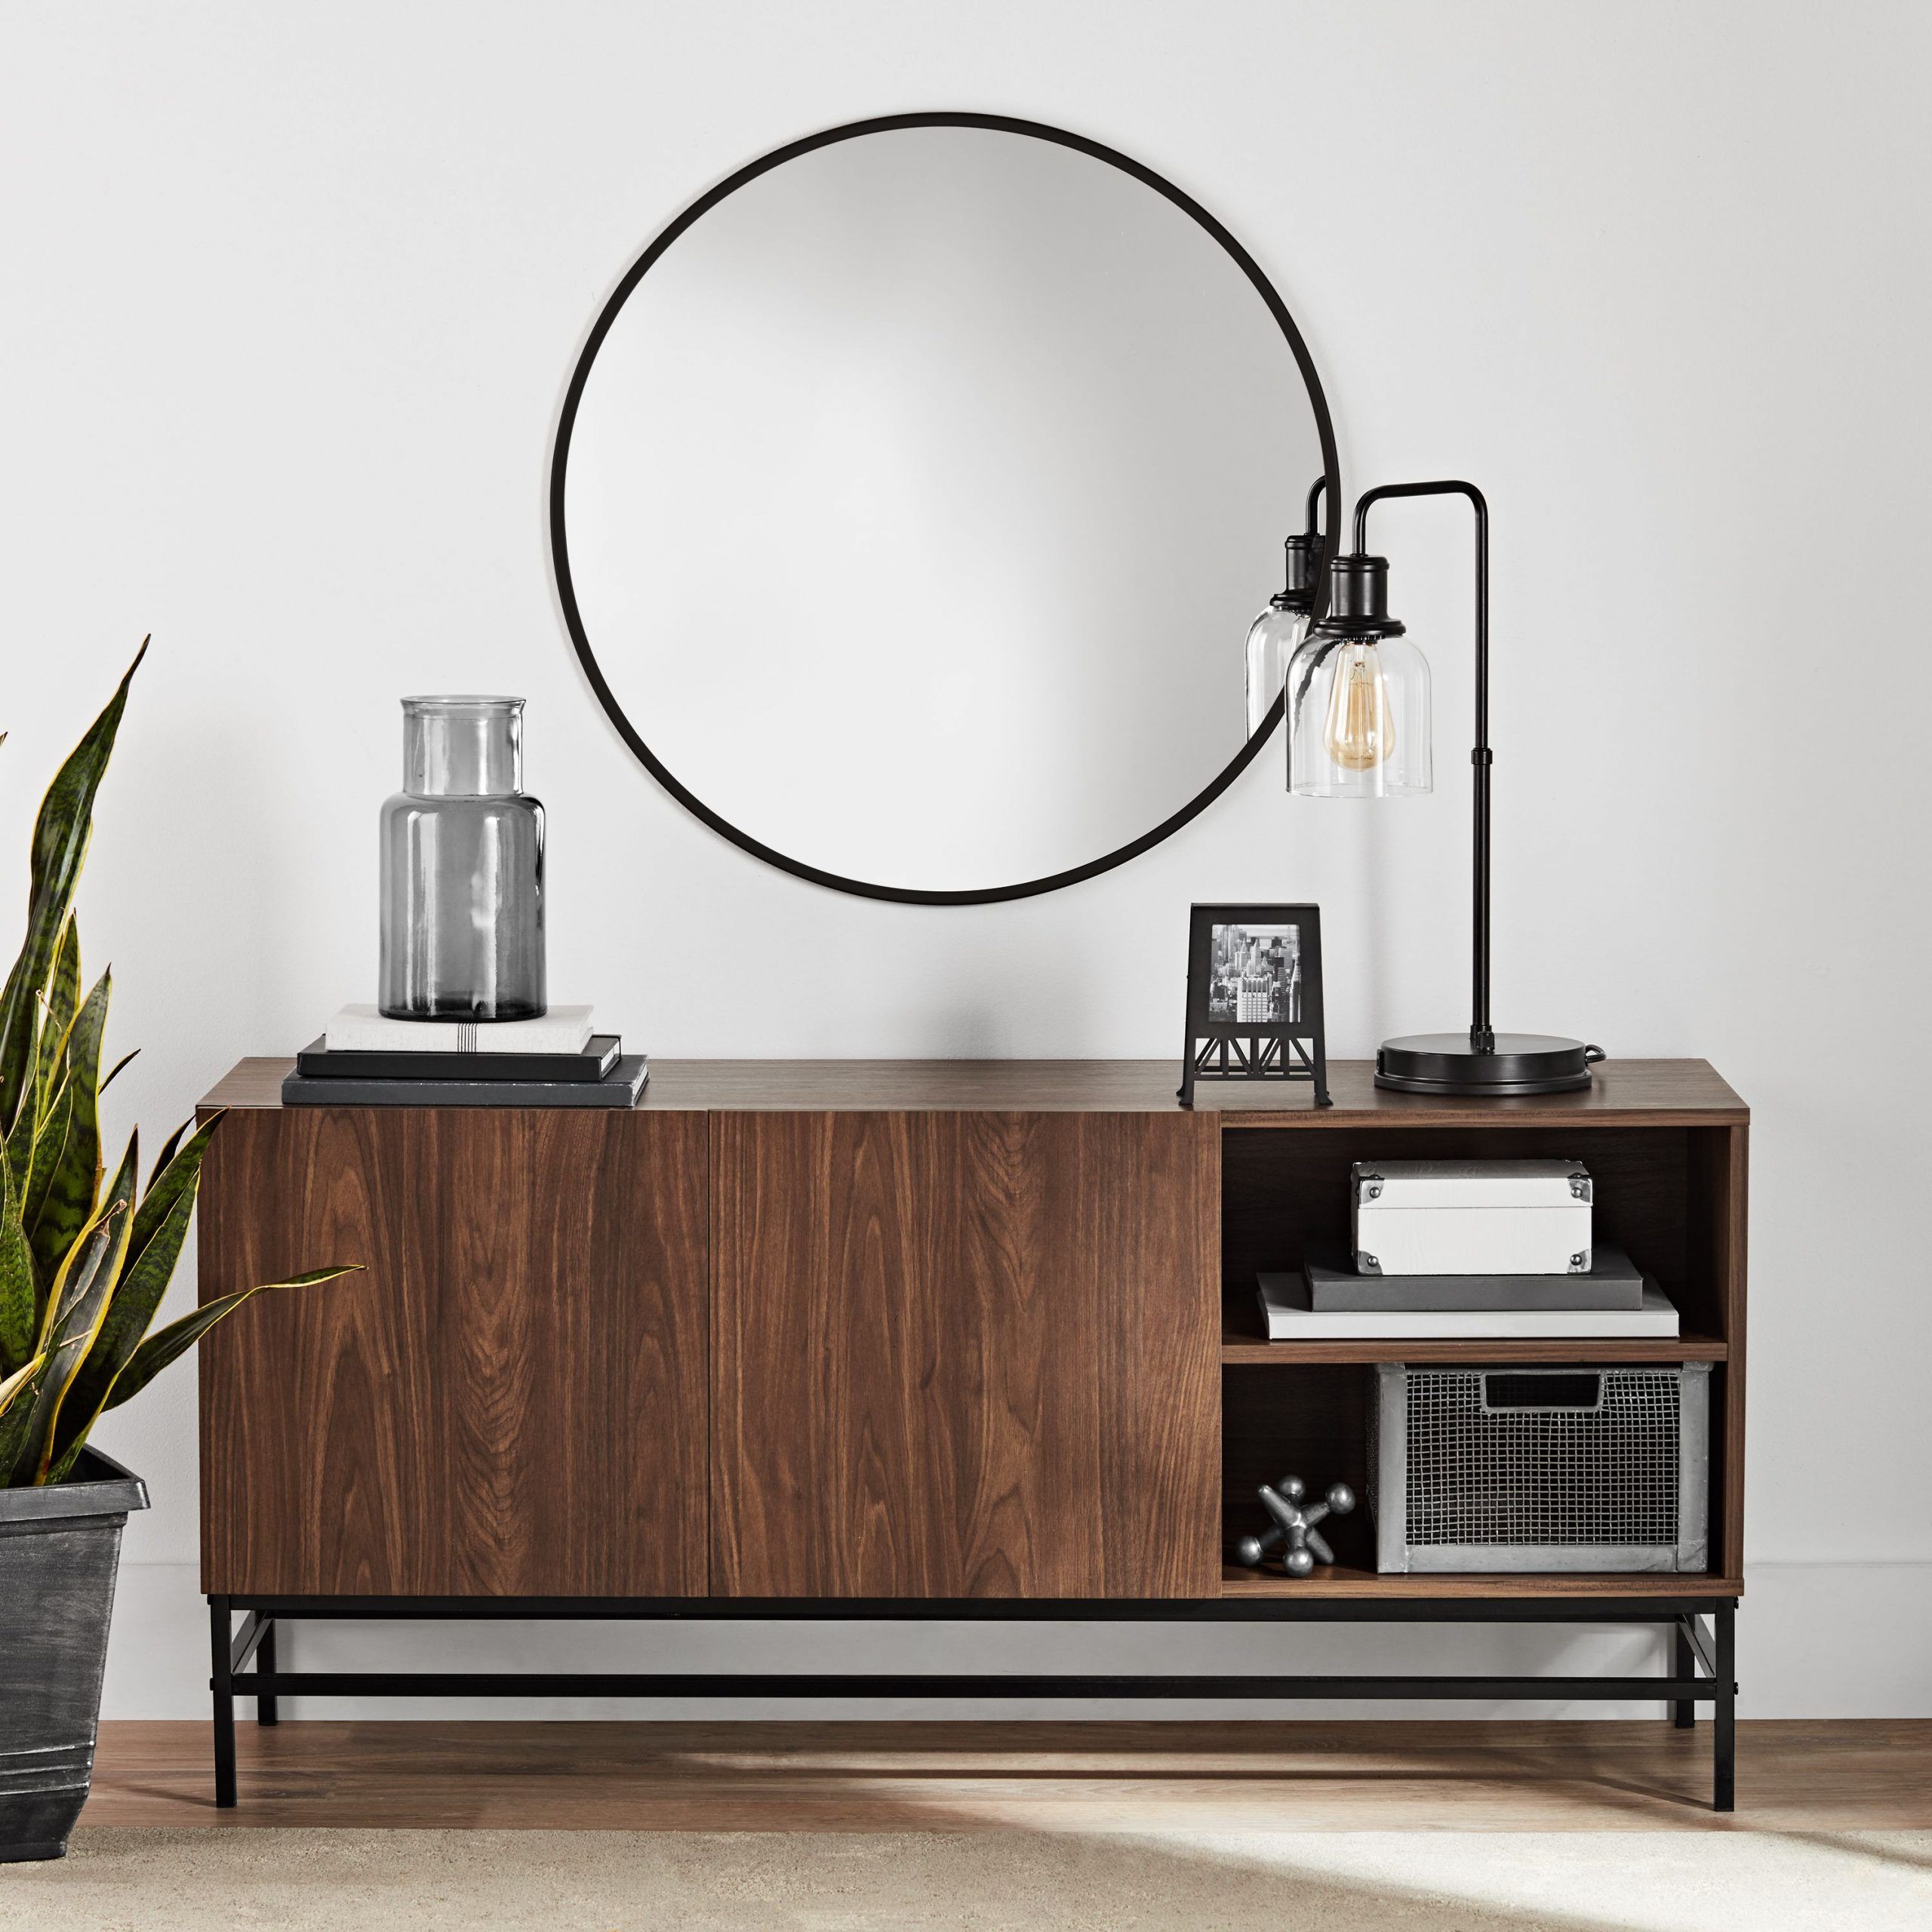 Mainstays Sumpter Park Console Table, Canyon Walnut Within 2017 Mainstays Parsons Tv Stands With Multiple Finishes (View 4 of 10)